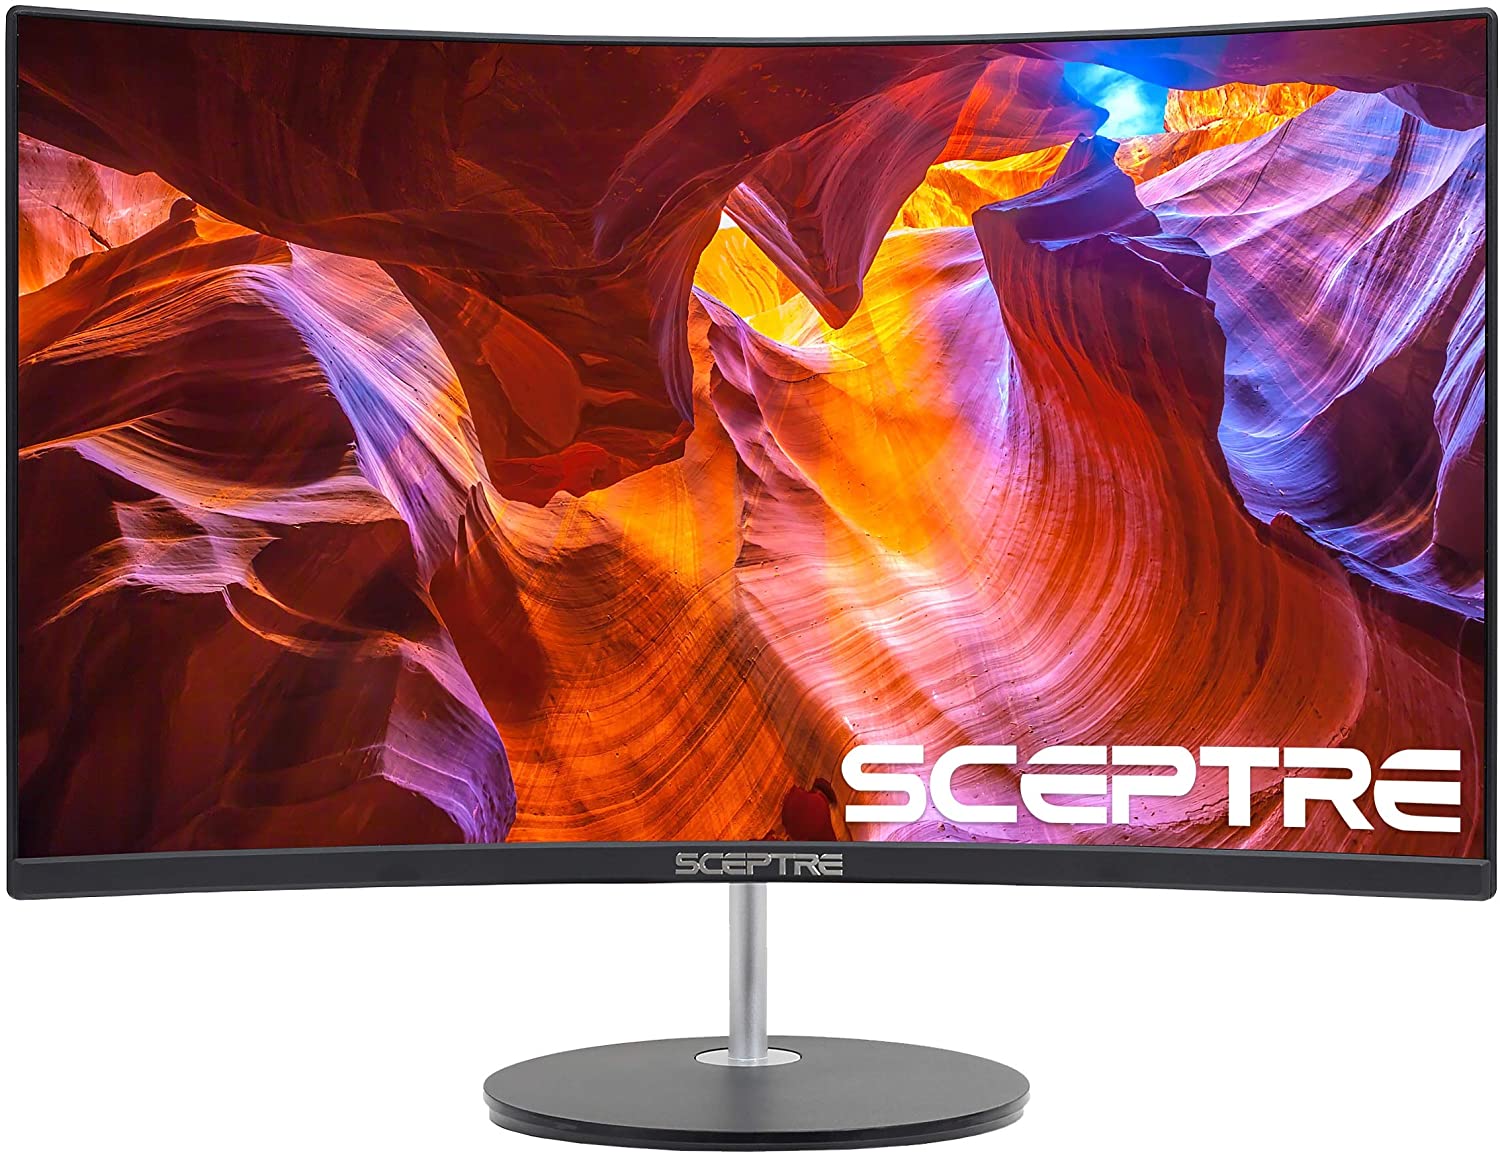 Sceptre 24-inch Curved LED Monitor